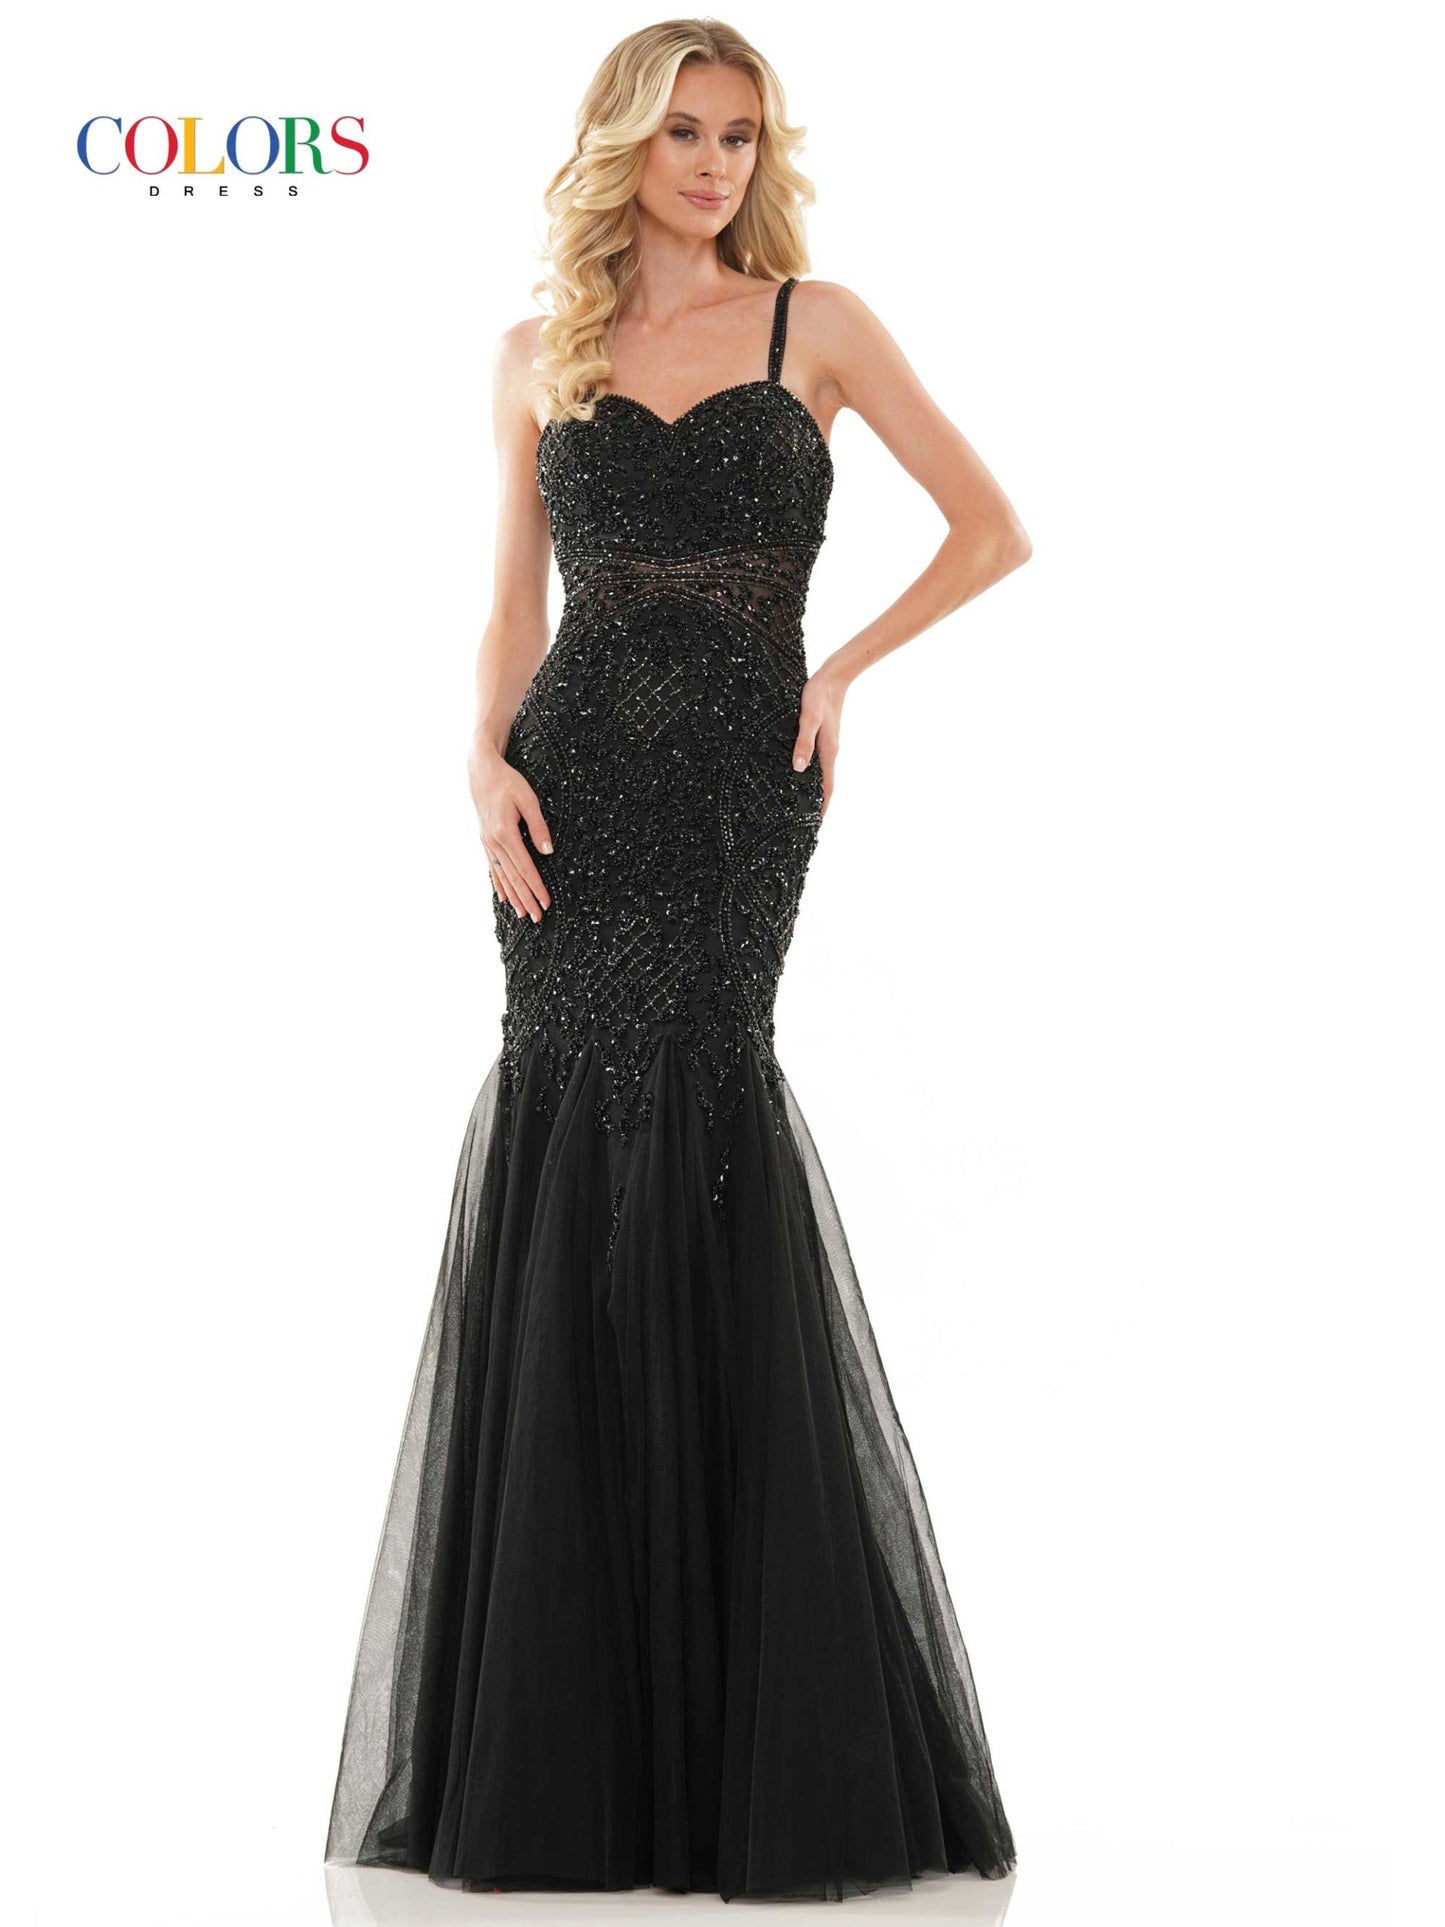 Colors Dress 2230 Black Mermaid Prom or Evening dress with an all over delicately beaded bodice mermaid dress in sweet heart neckline, tulle godet, beaded strap